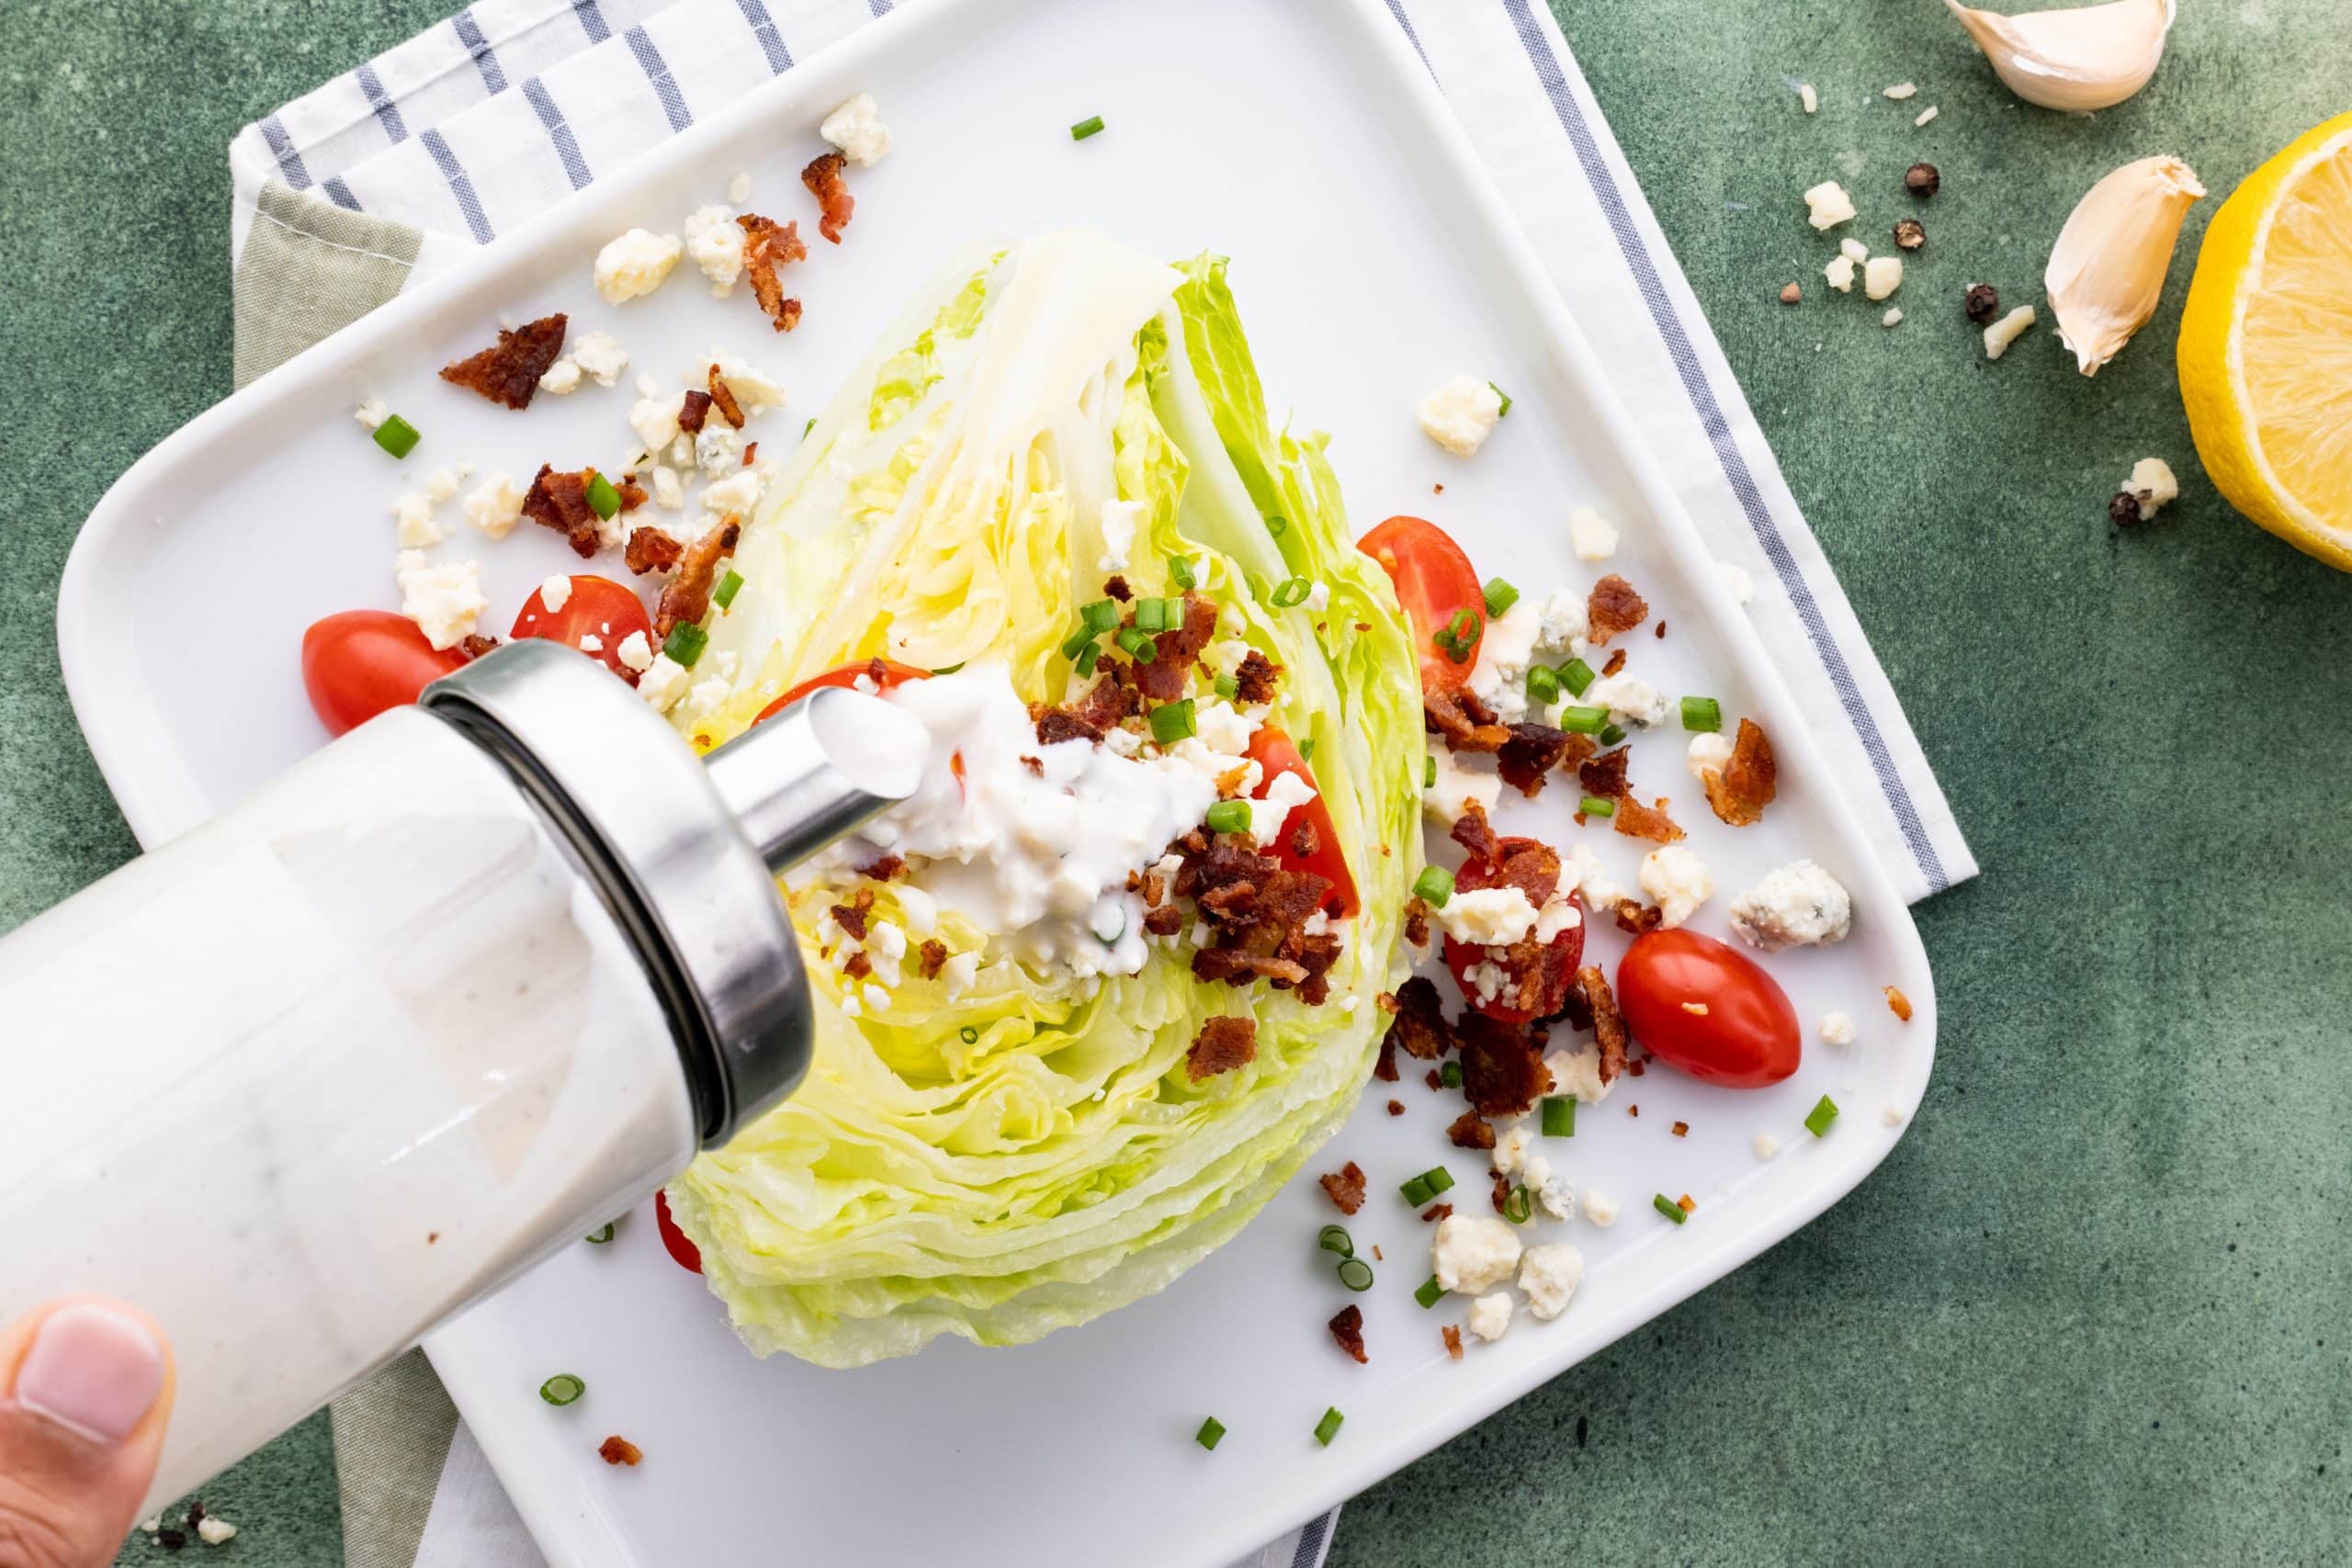 Overhead of a hand pouring blue cheese dressing onto an iceberg wedge salad.